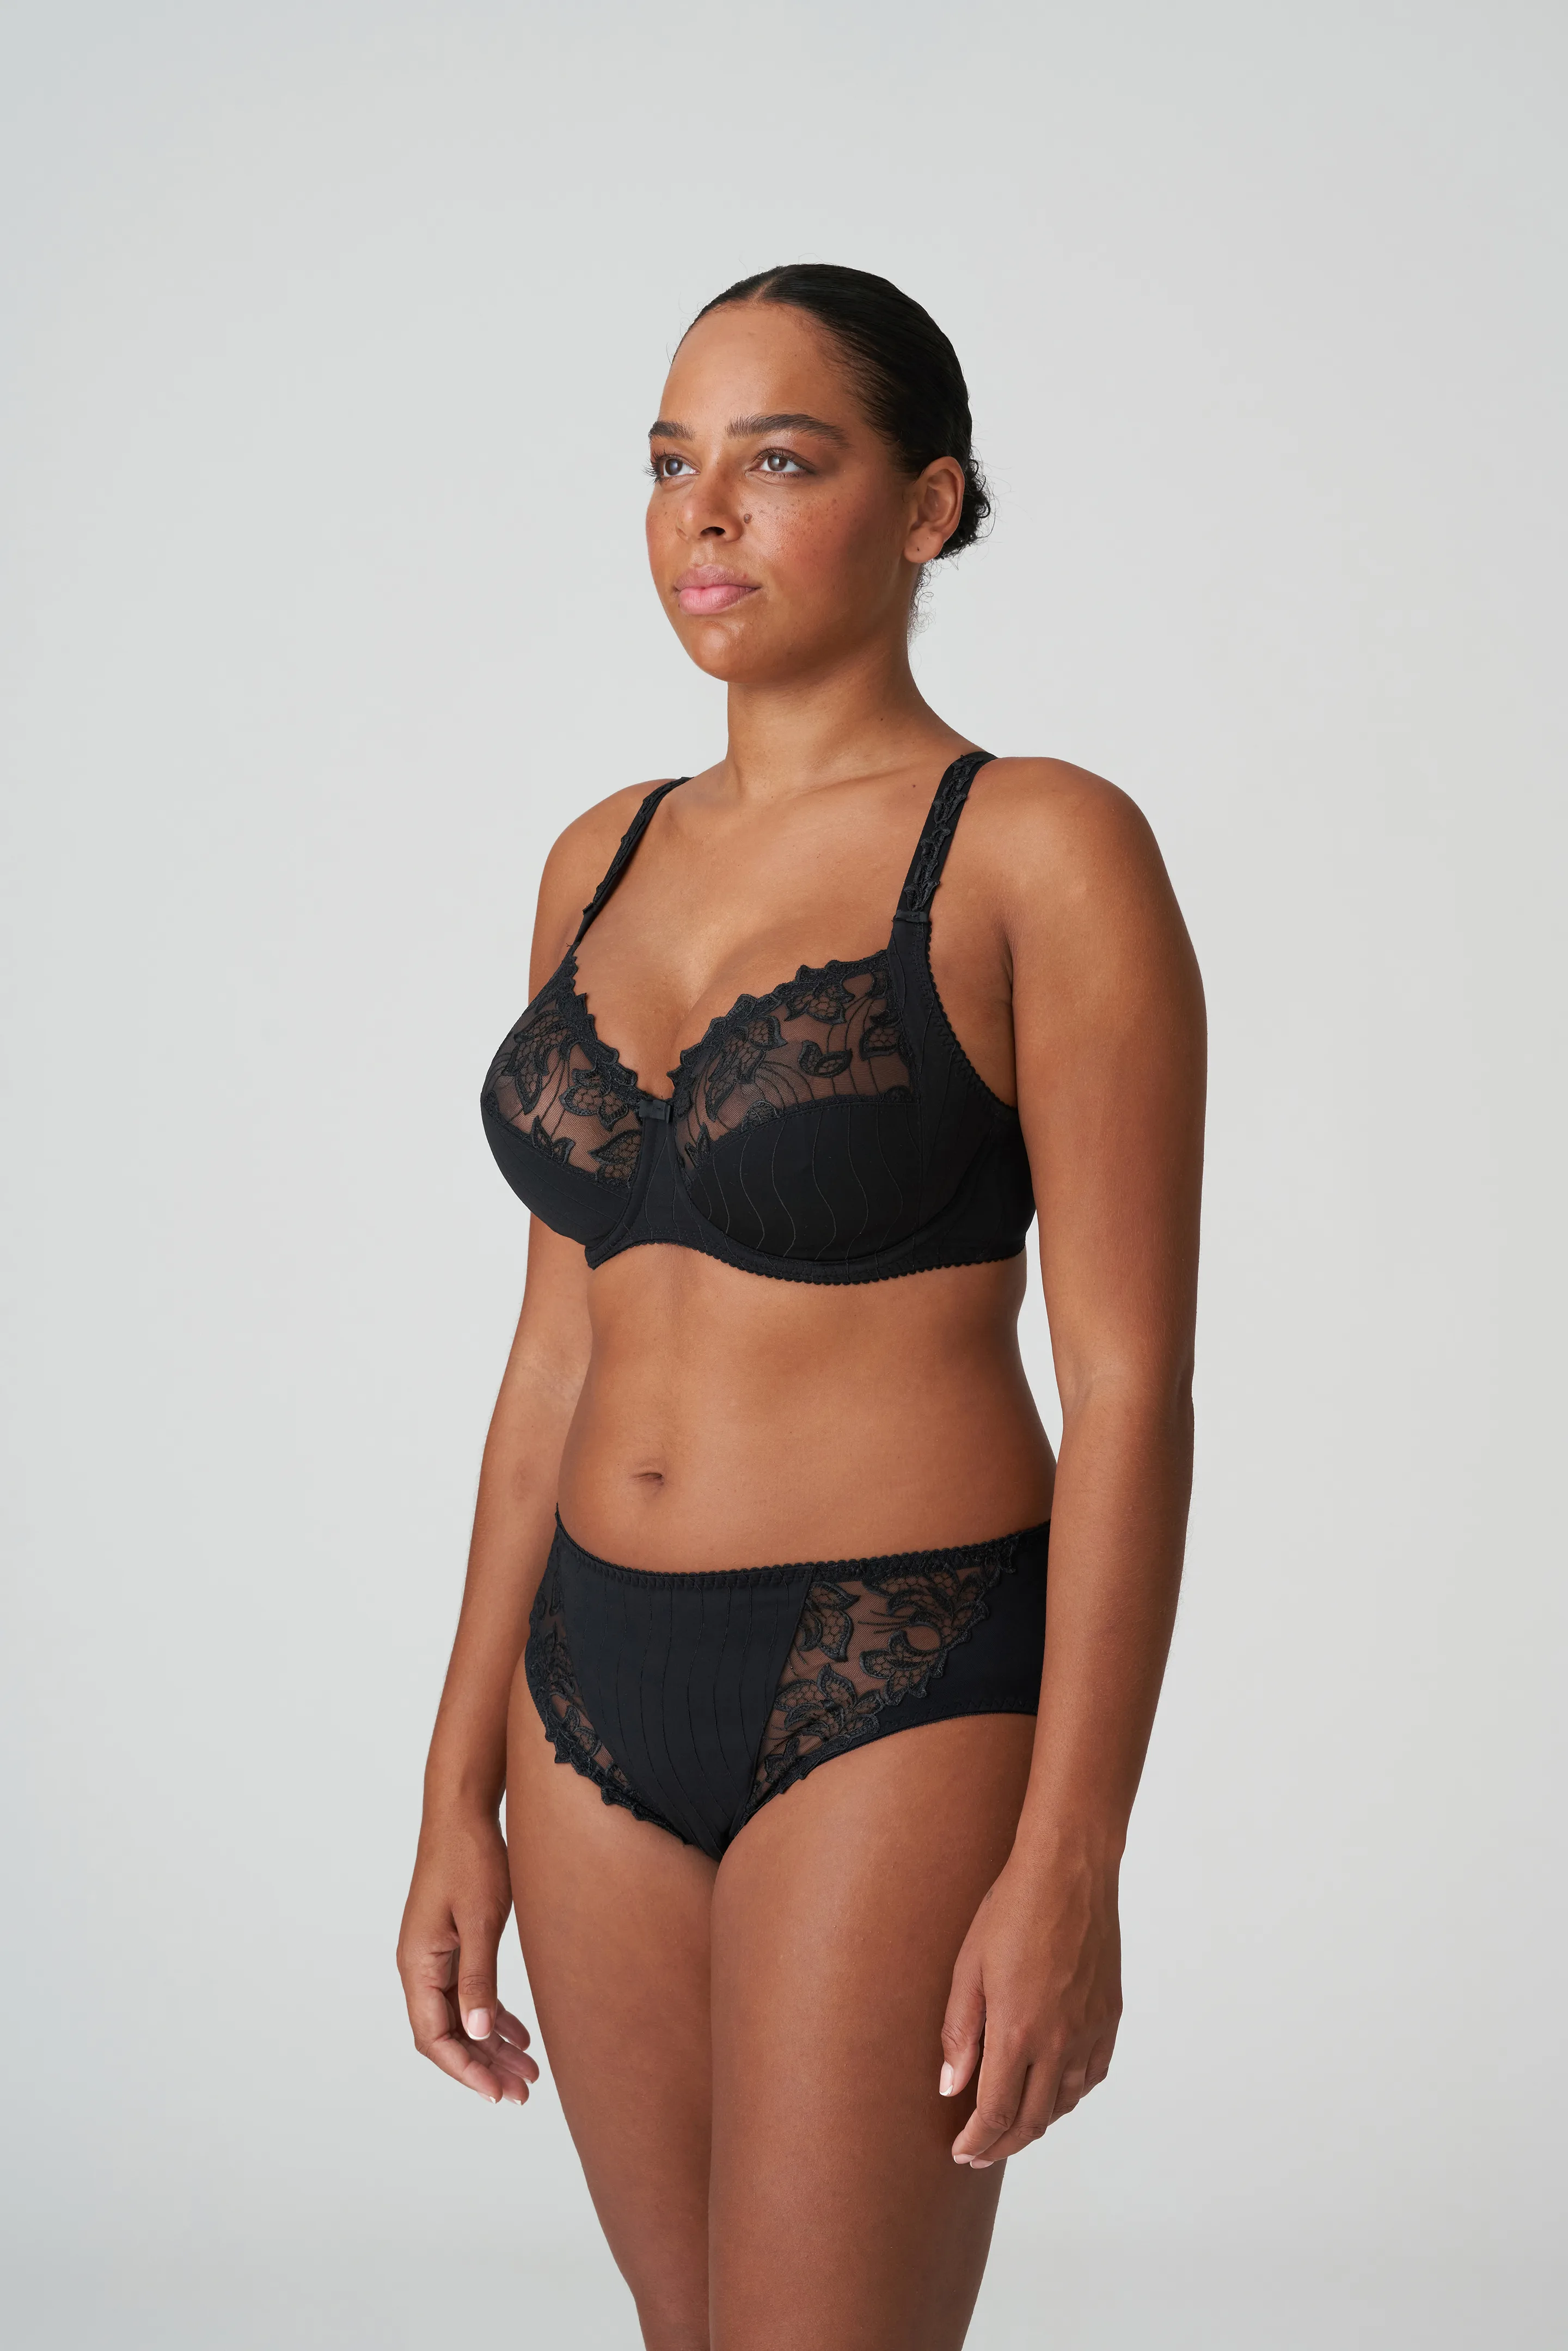 Prima Donna Deauville Full Cup Body - Belle Lingerie